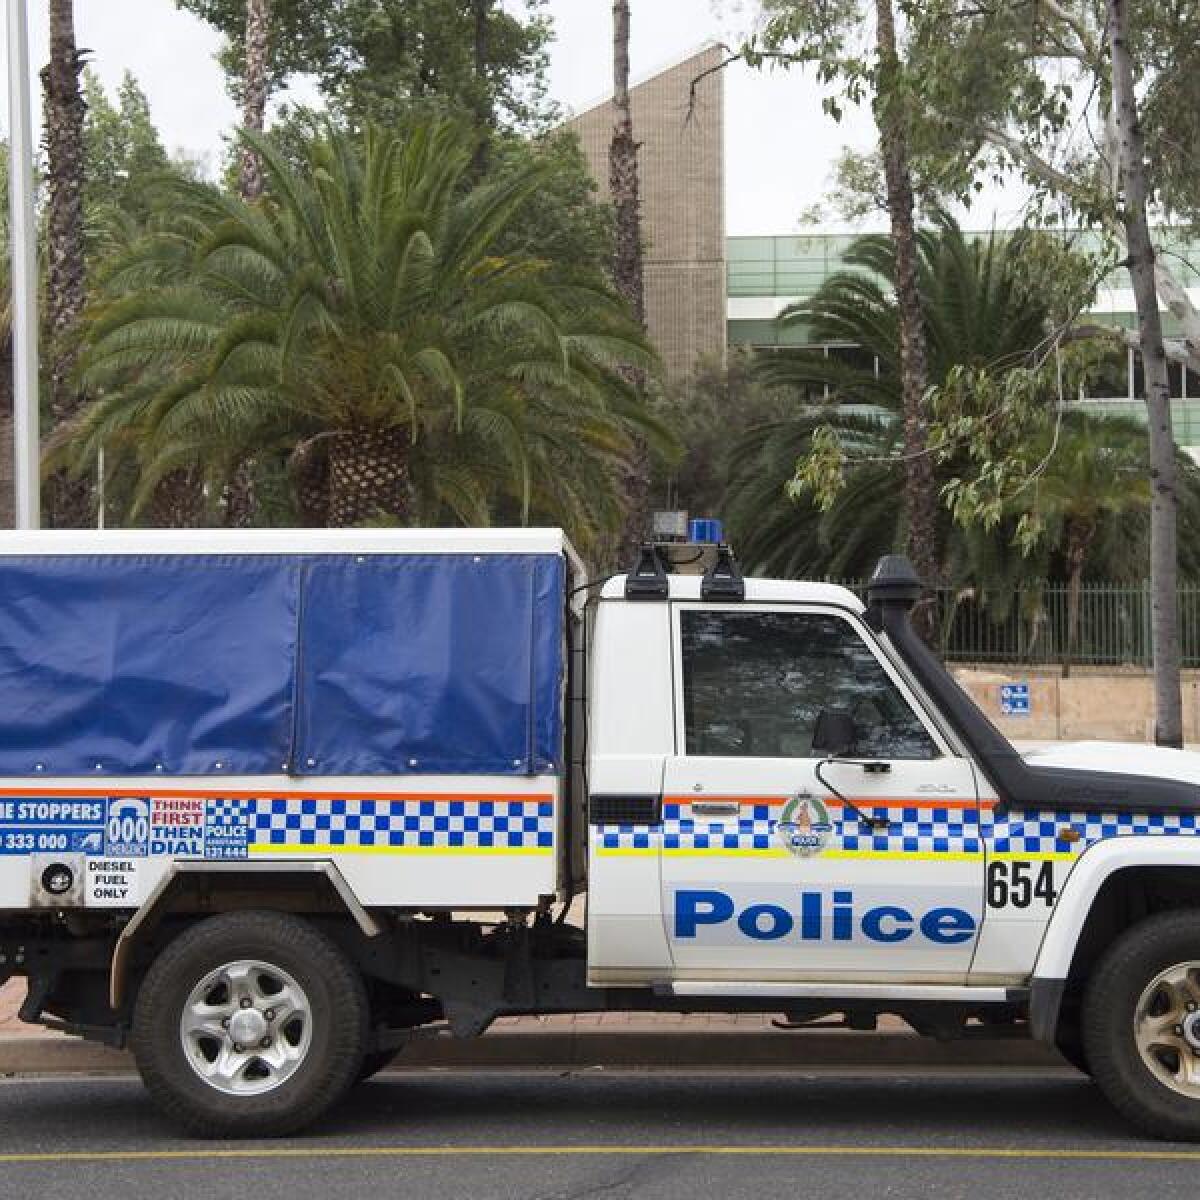 A police vehicle in Alice Springs.